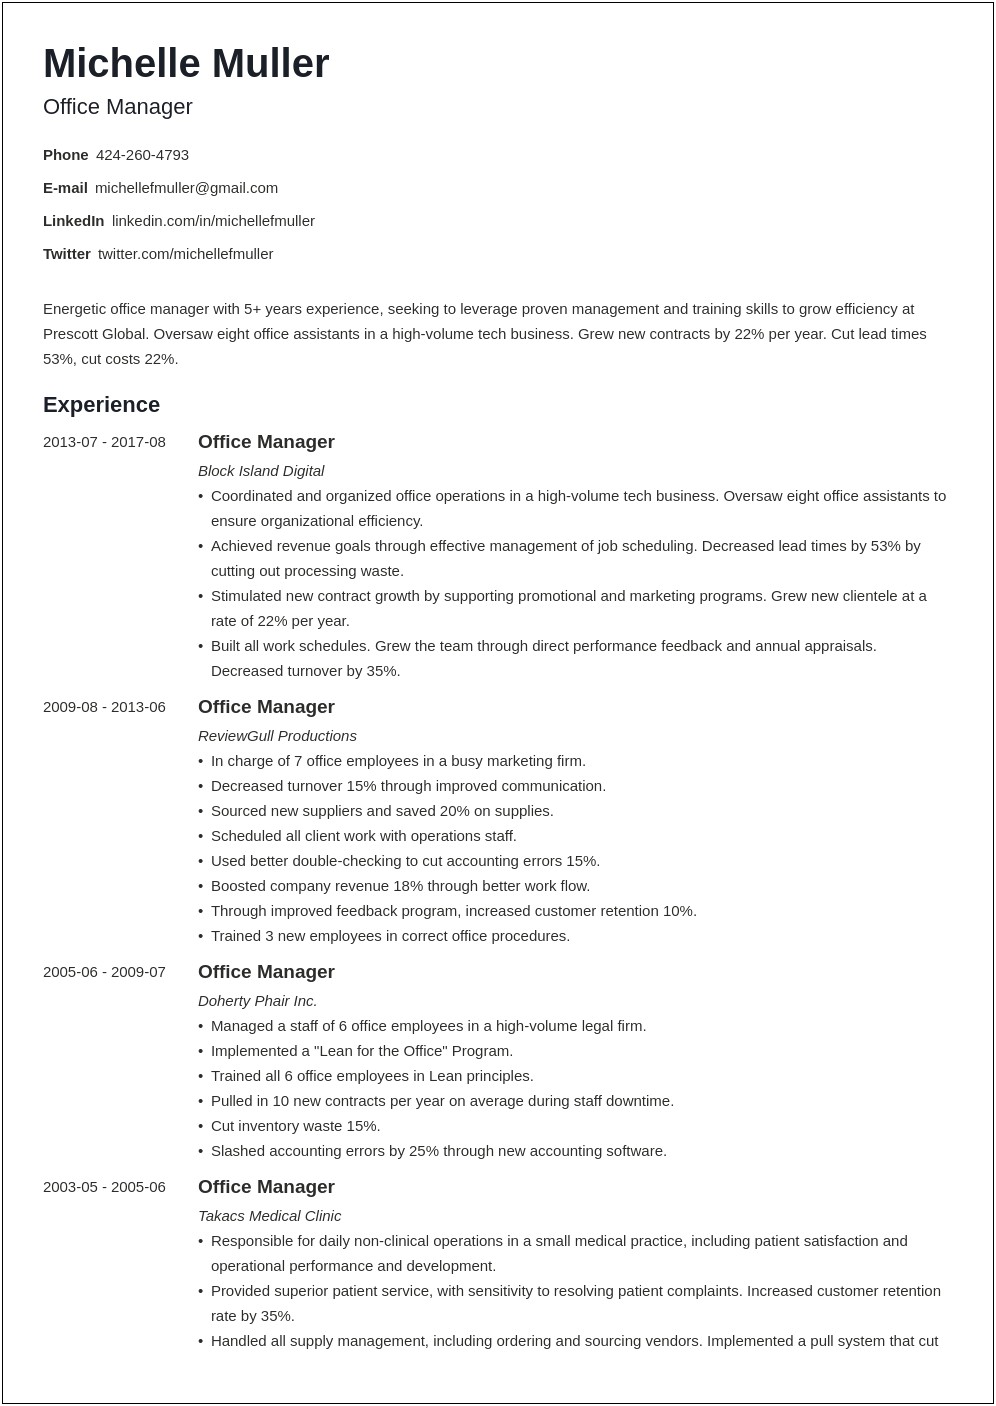 Sample Resume Multiple Positions At The Same Company